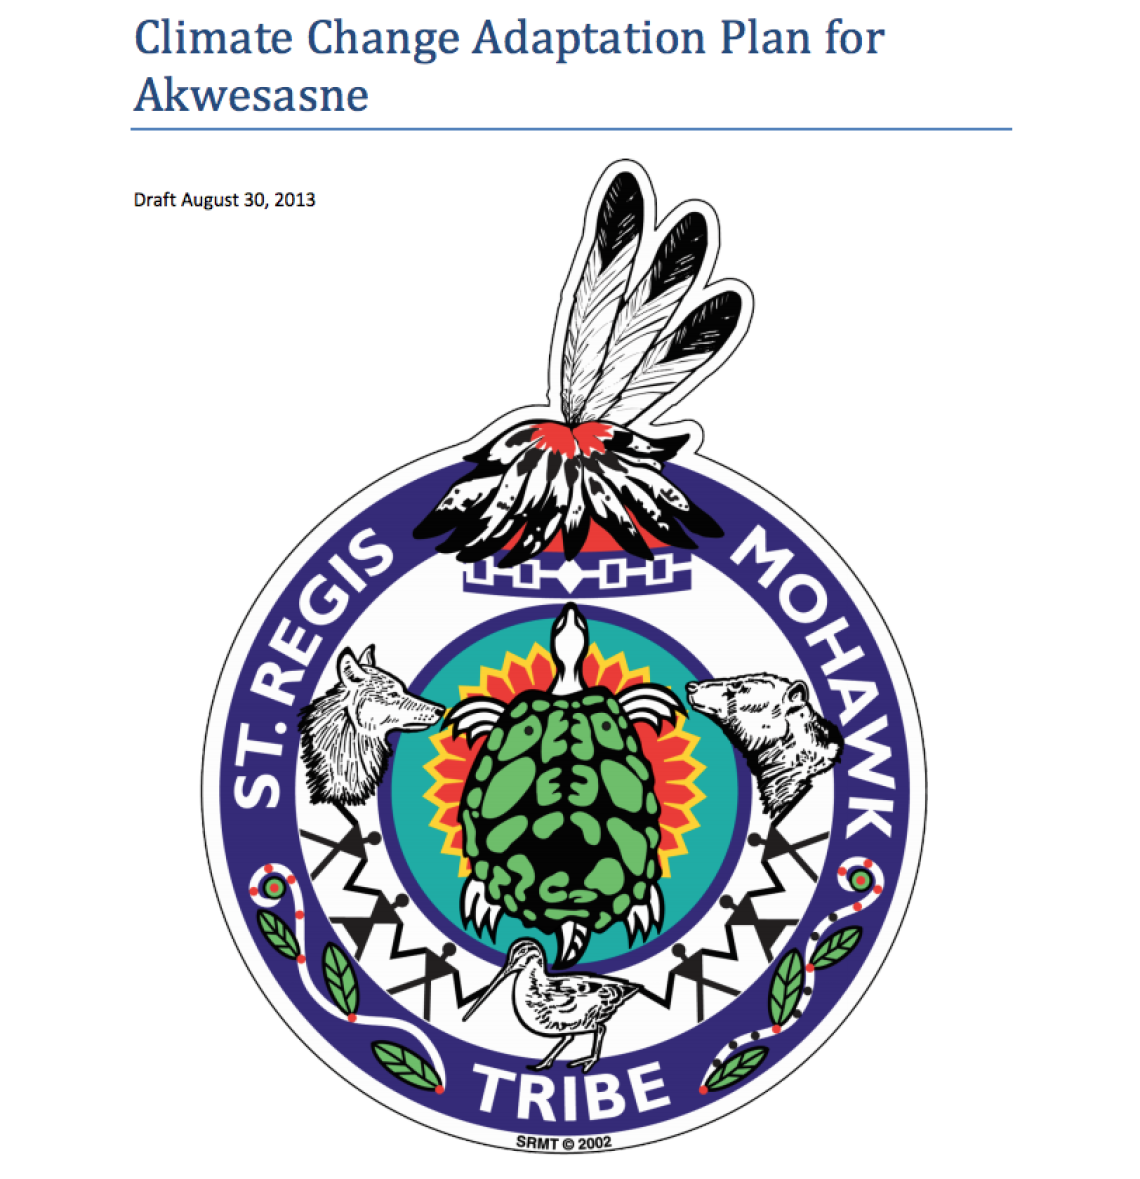 Climate Change Adaptation Plan for Akwesasne